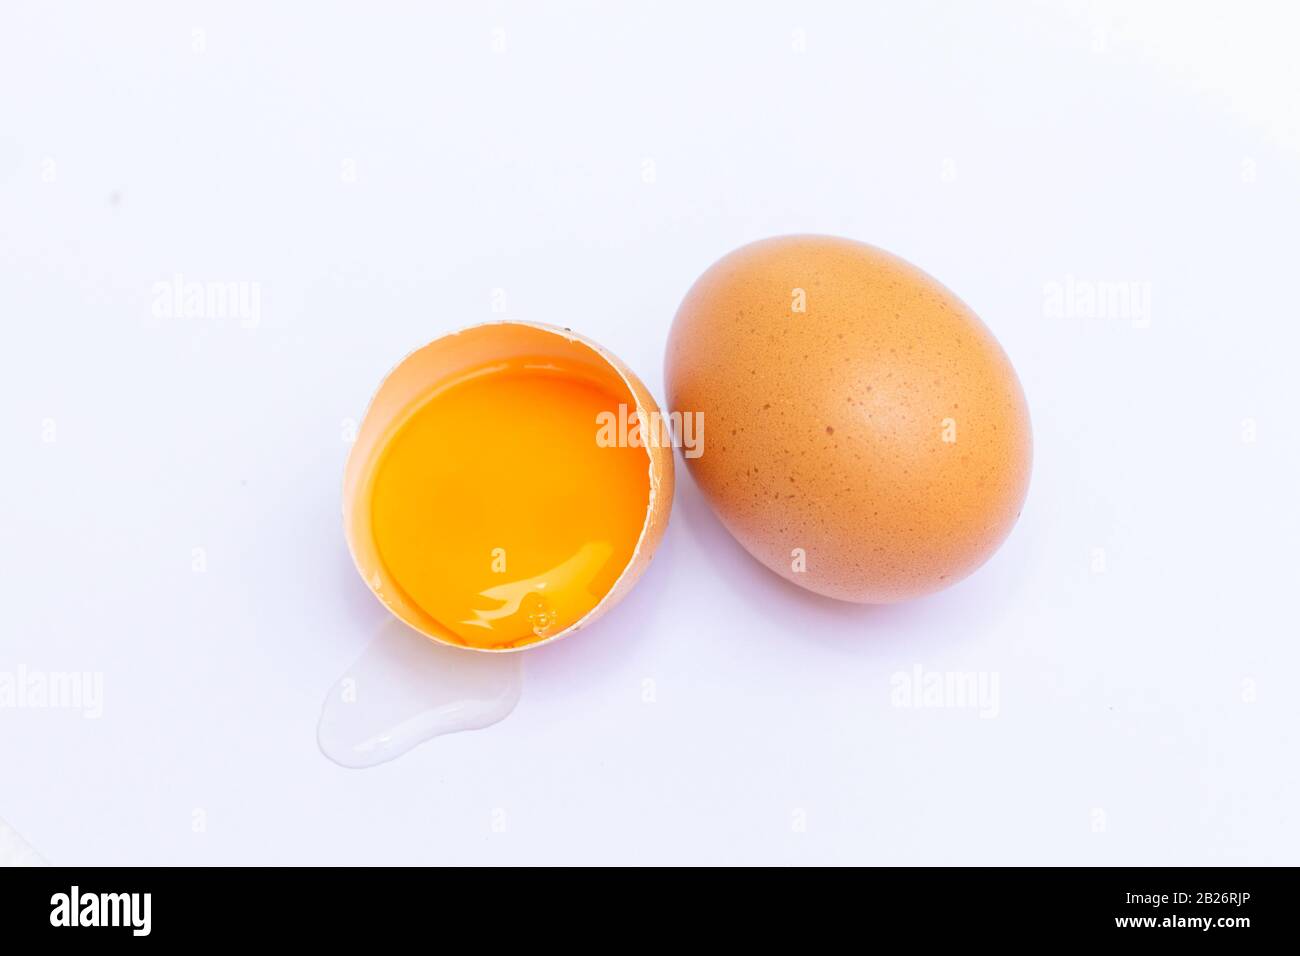 Two brown eggs With one egg broken in half, with a yolk inside the eggshell, laid on a white background Stock Photo